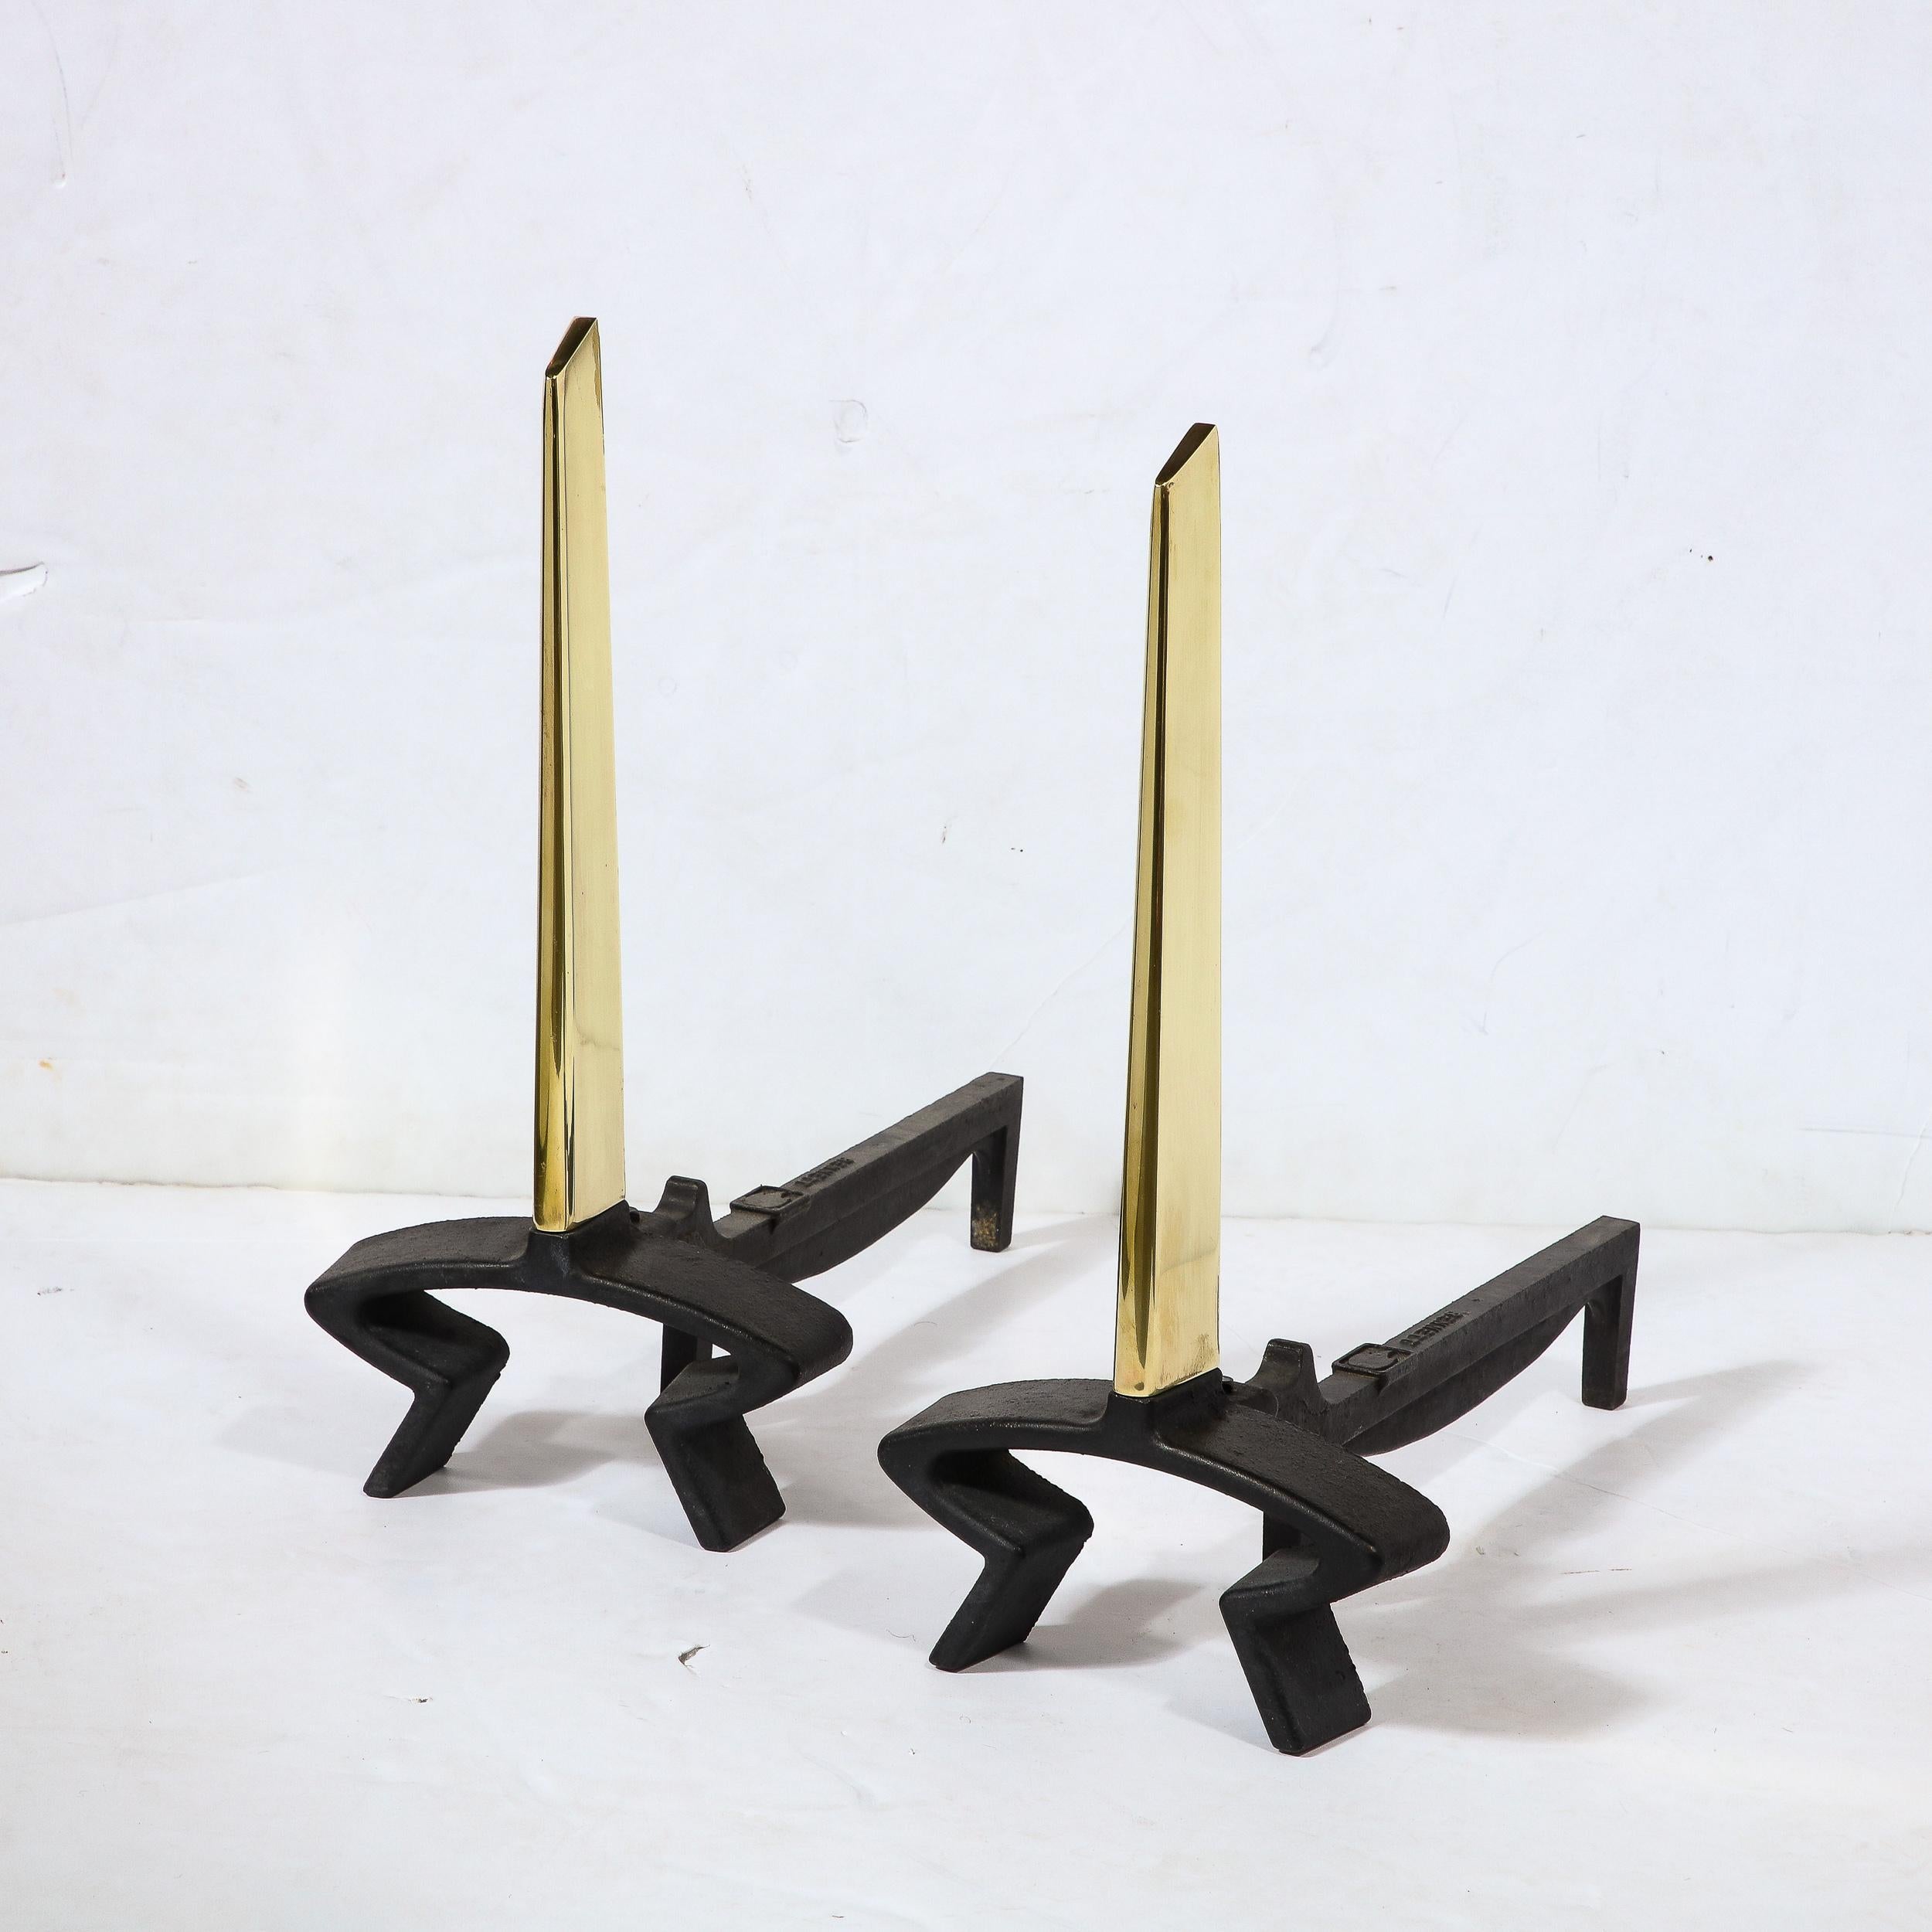 United States, circa 1950

These stunning Art Deco Andirons were realized by the legendary designer Donald Deskey- the visionary behind Radio City Music Hall- for Bennet in the United States, circa 1950. The andirons are polished brass as well as